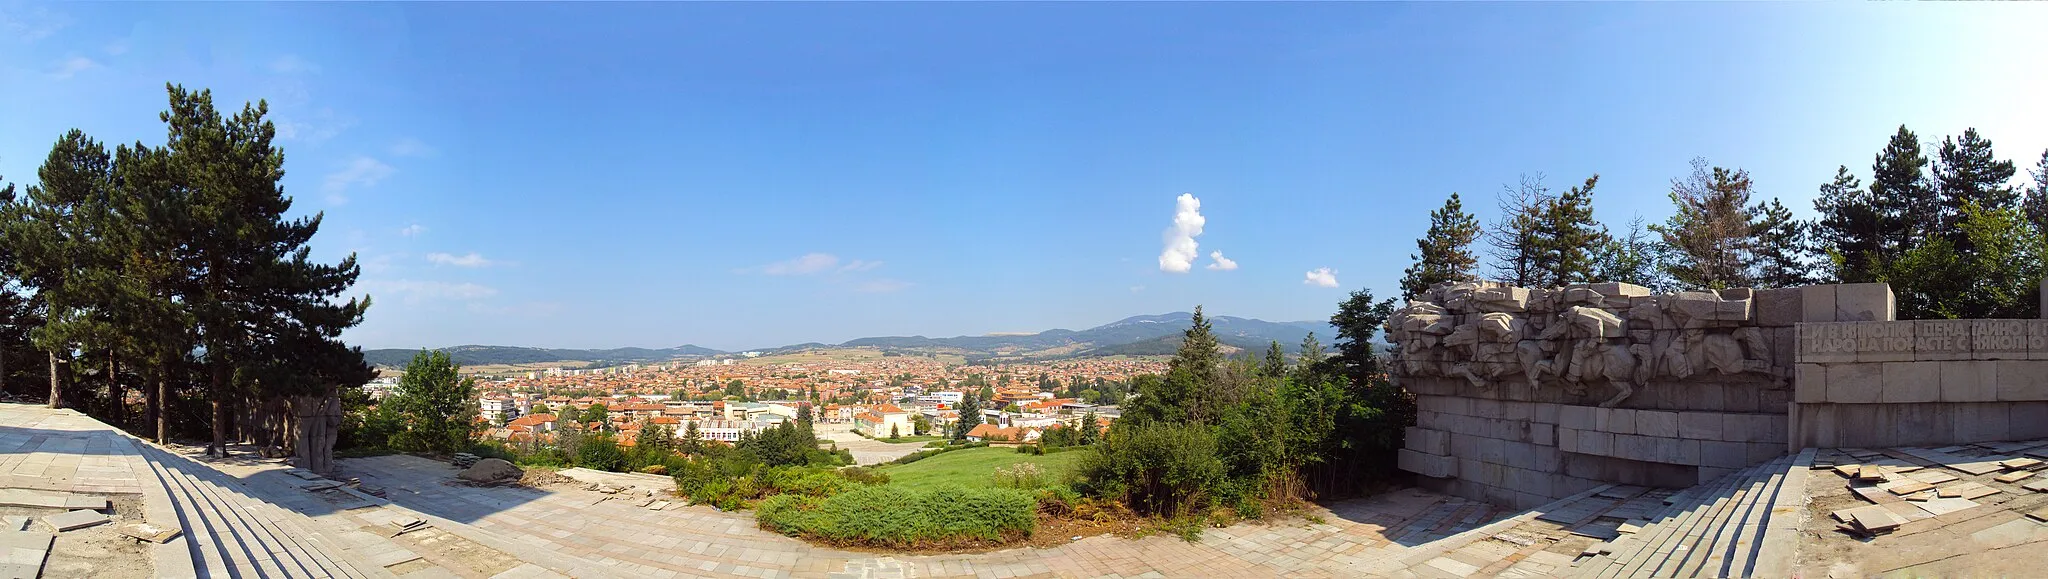 Photo showing: View from the Apriltsi Memorial Complex in town of Panagyurishte